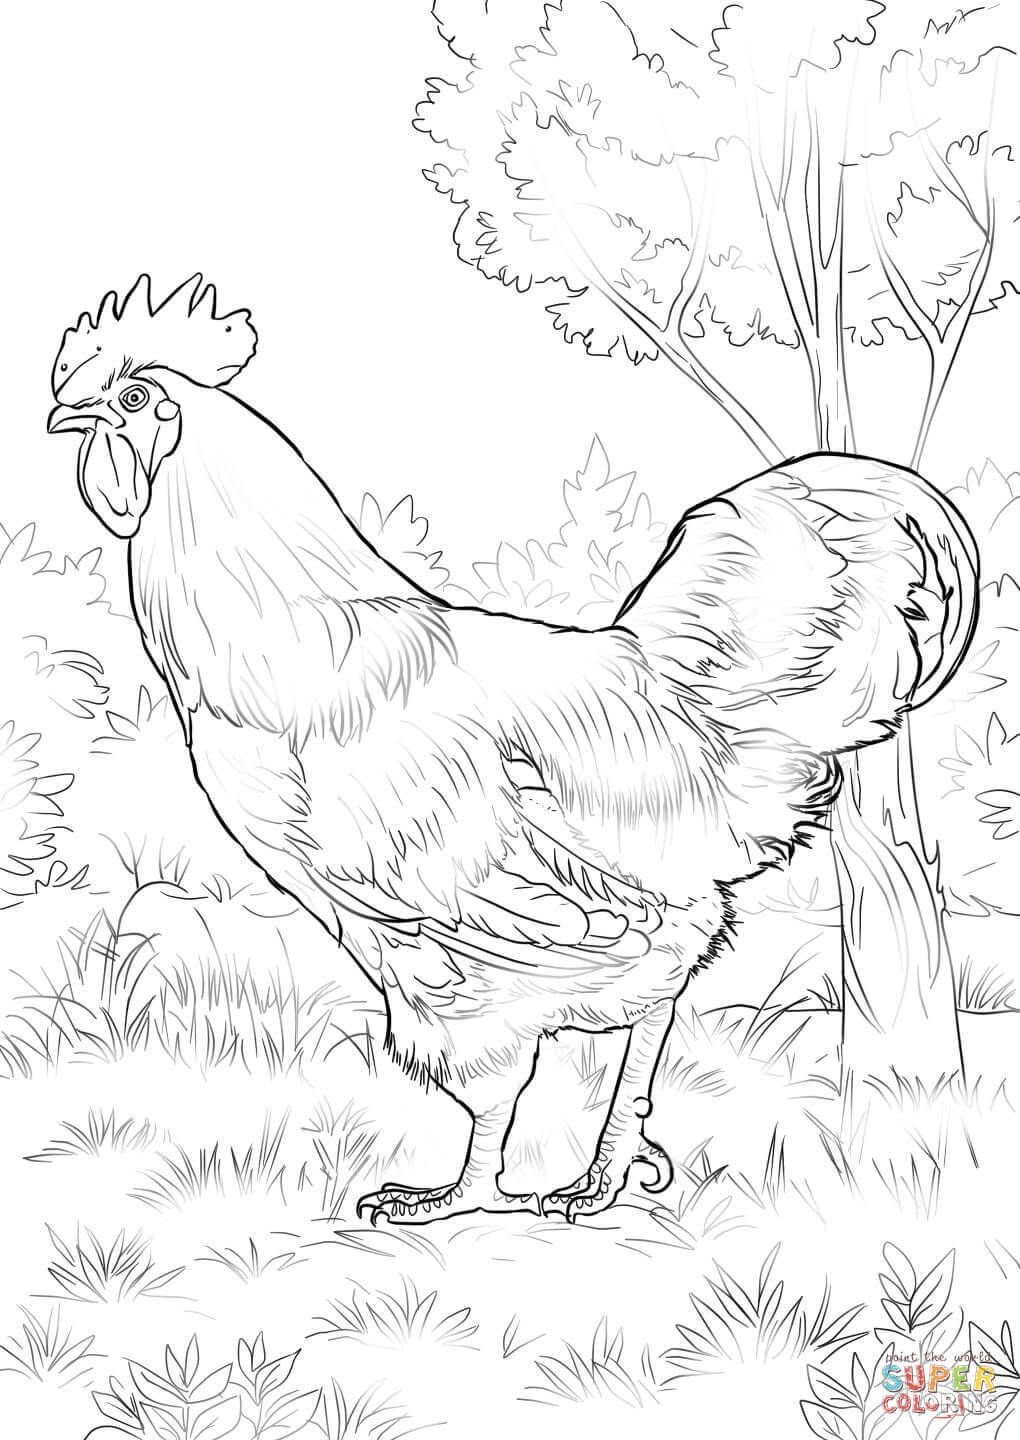 rooster-coloring-pages-for-adults-at-getcolorings-free-printable-colorings-pages-to-print